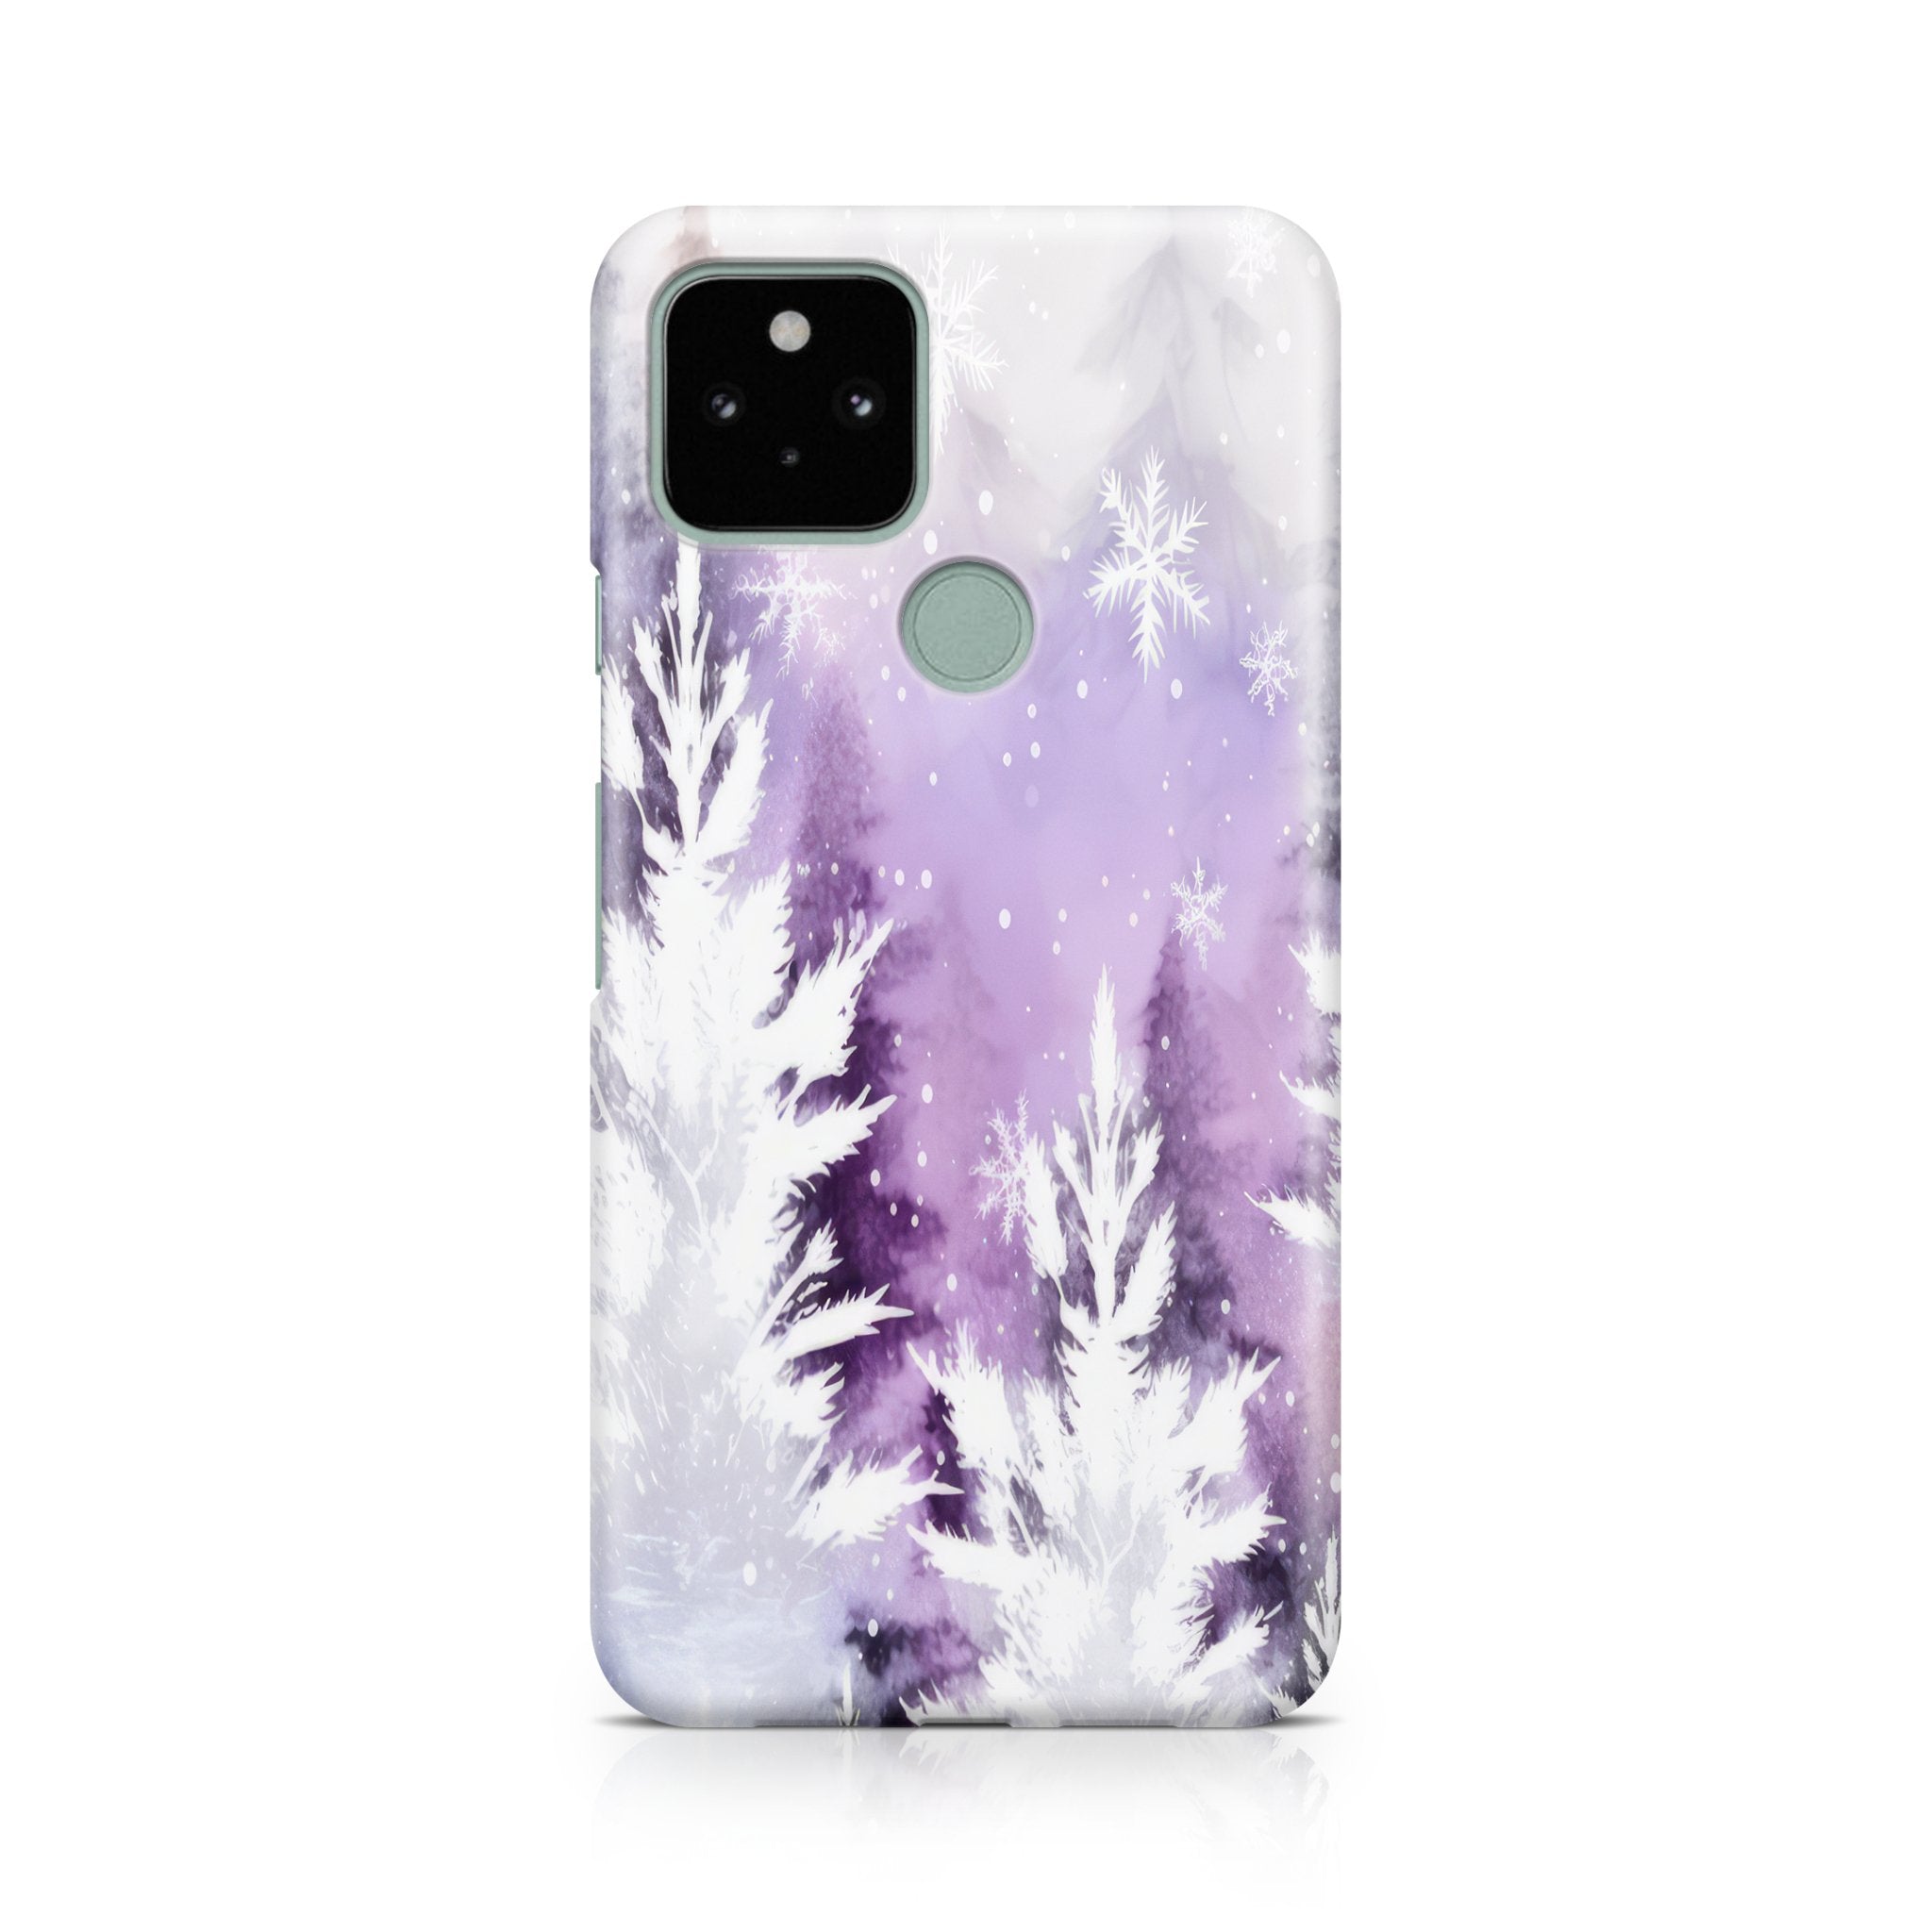 Snowy Forest - Google phone case designs by CaseSwagger